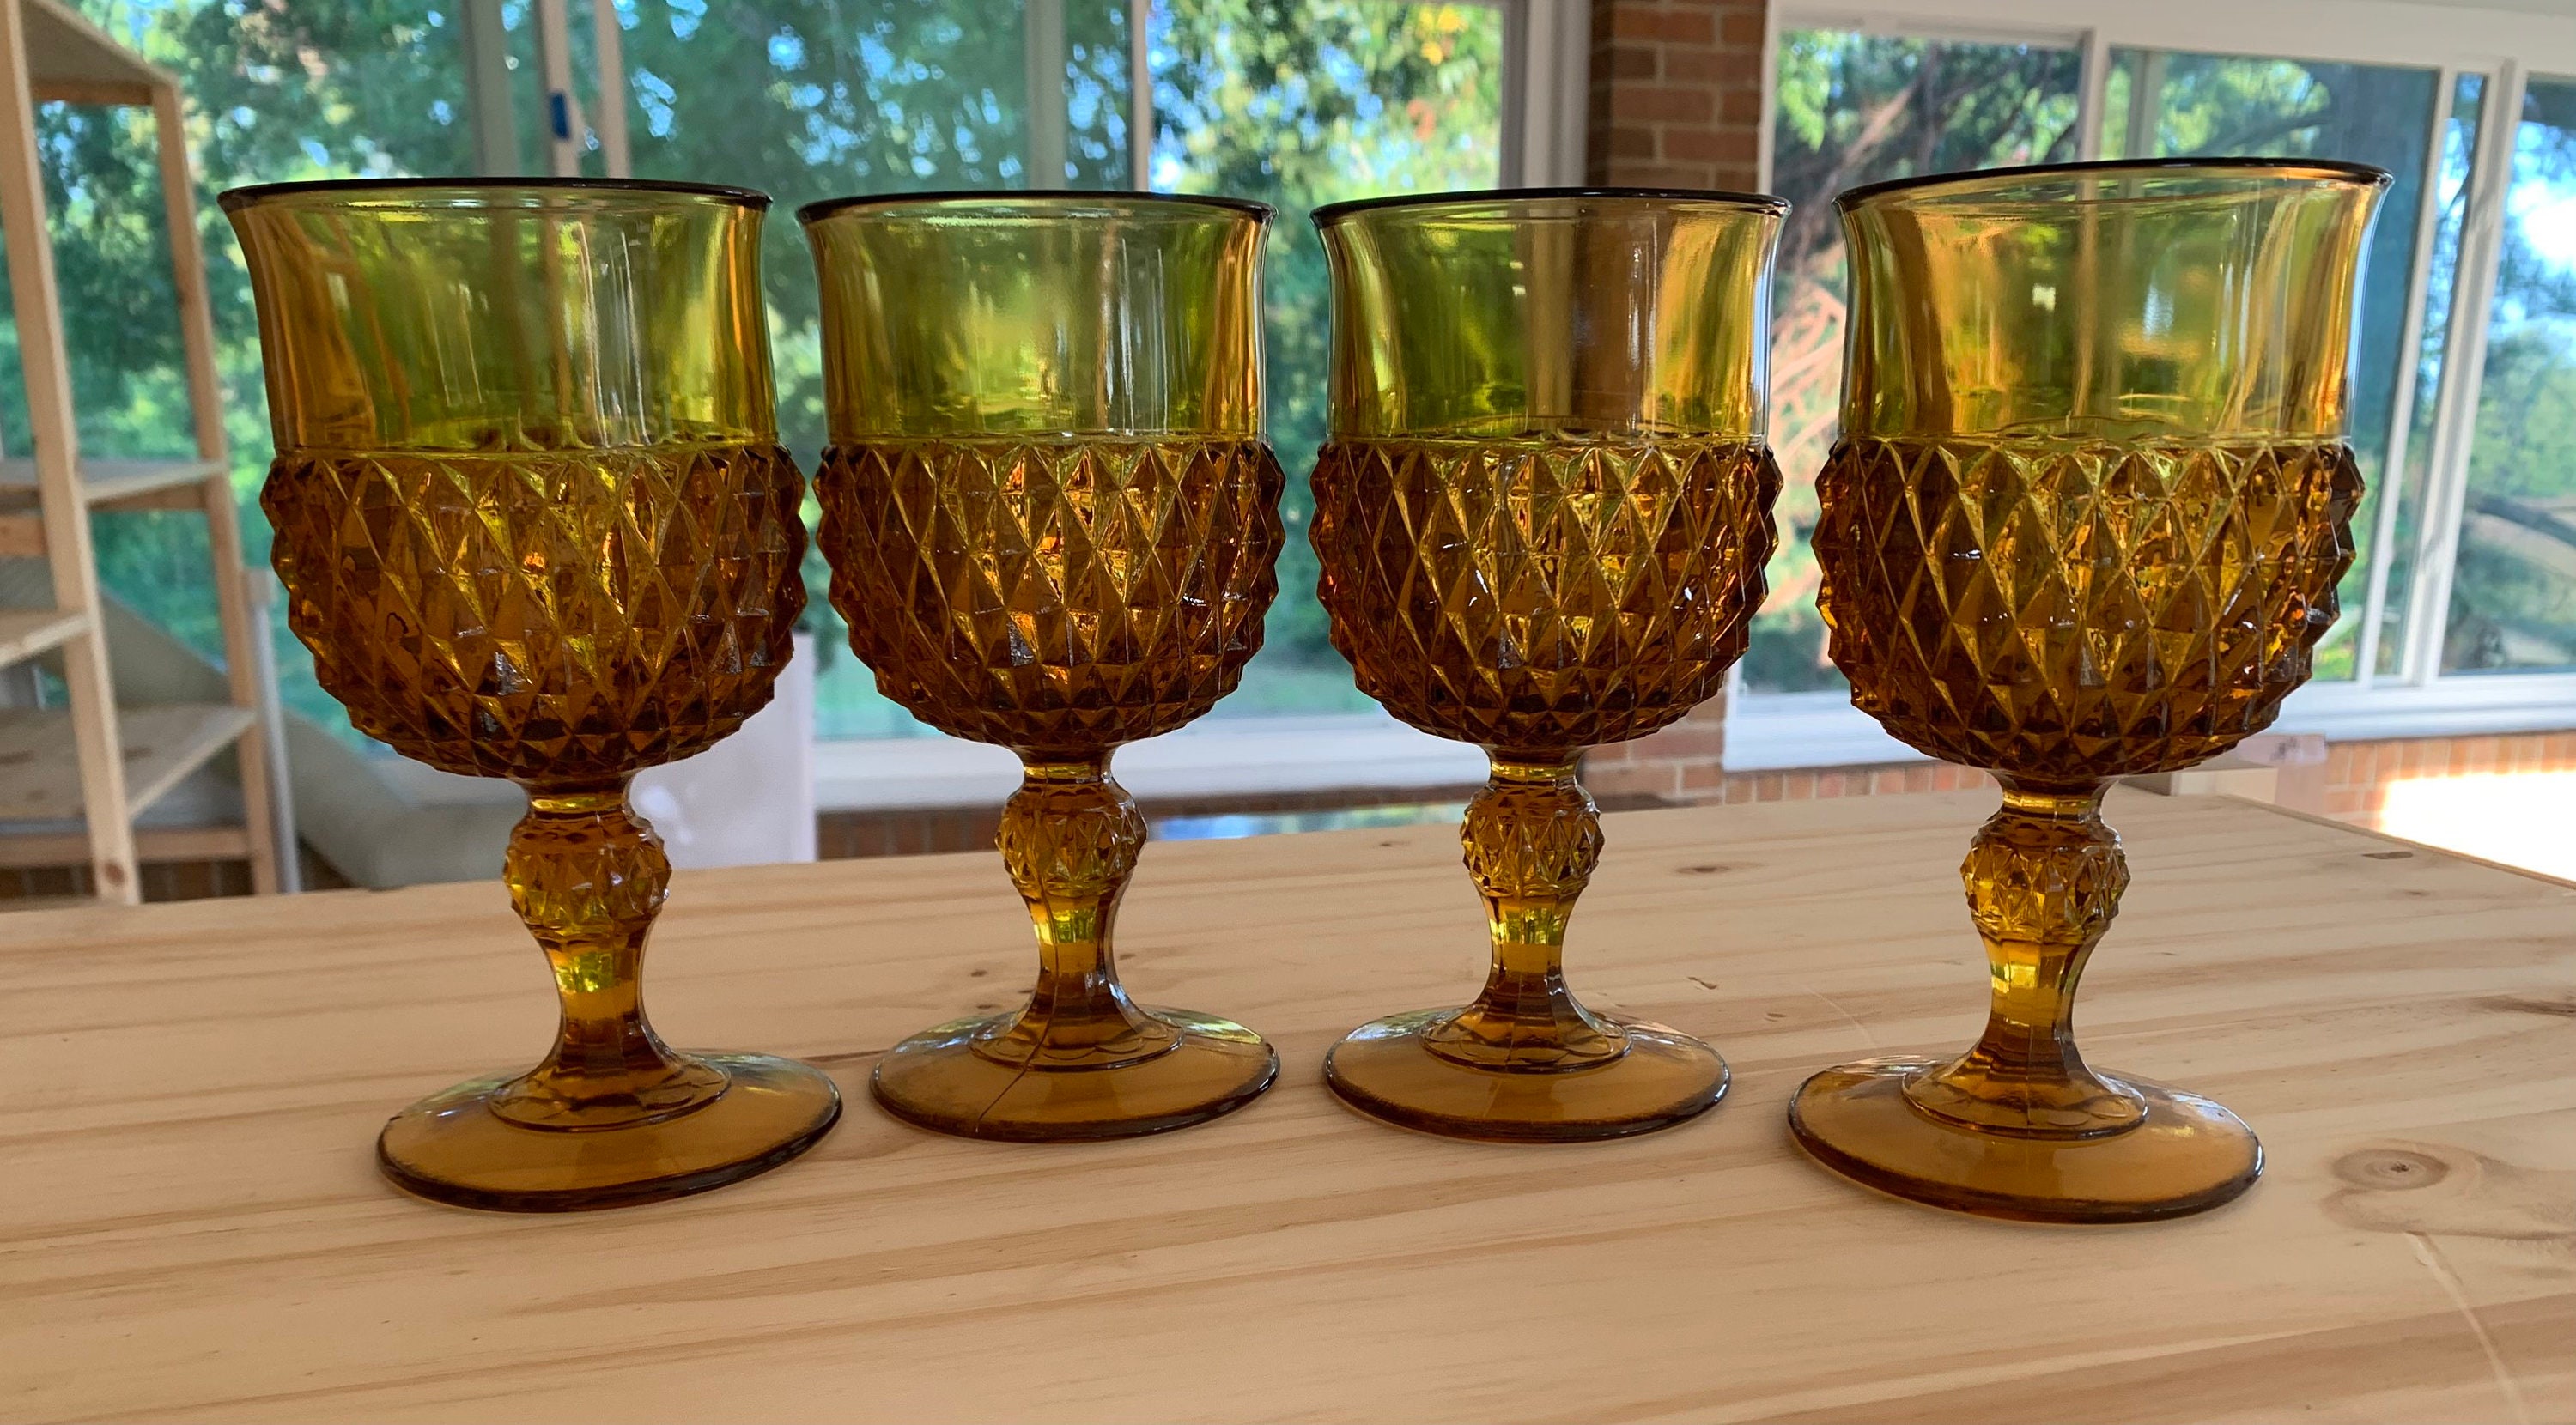 Set of 4 Indiana Glass Stemmed Water Goblets in Diamond Point Designed of  10 Fluid Ounce Glasses. I Have Multiple Sets Available. Bar 249 